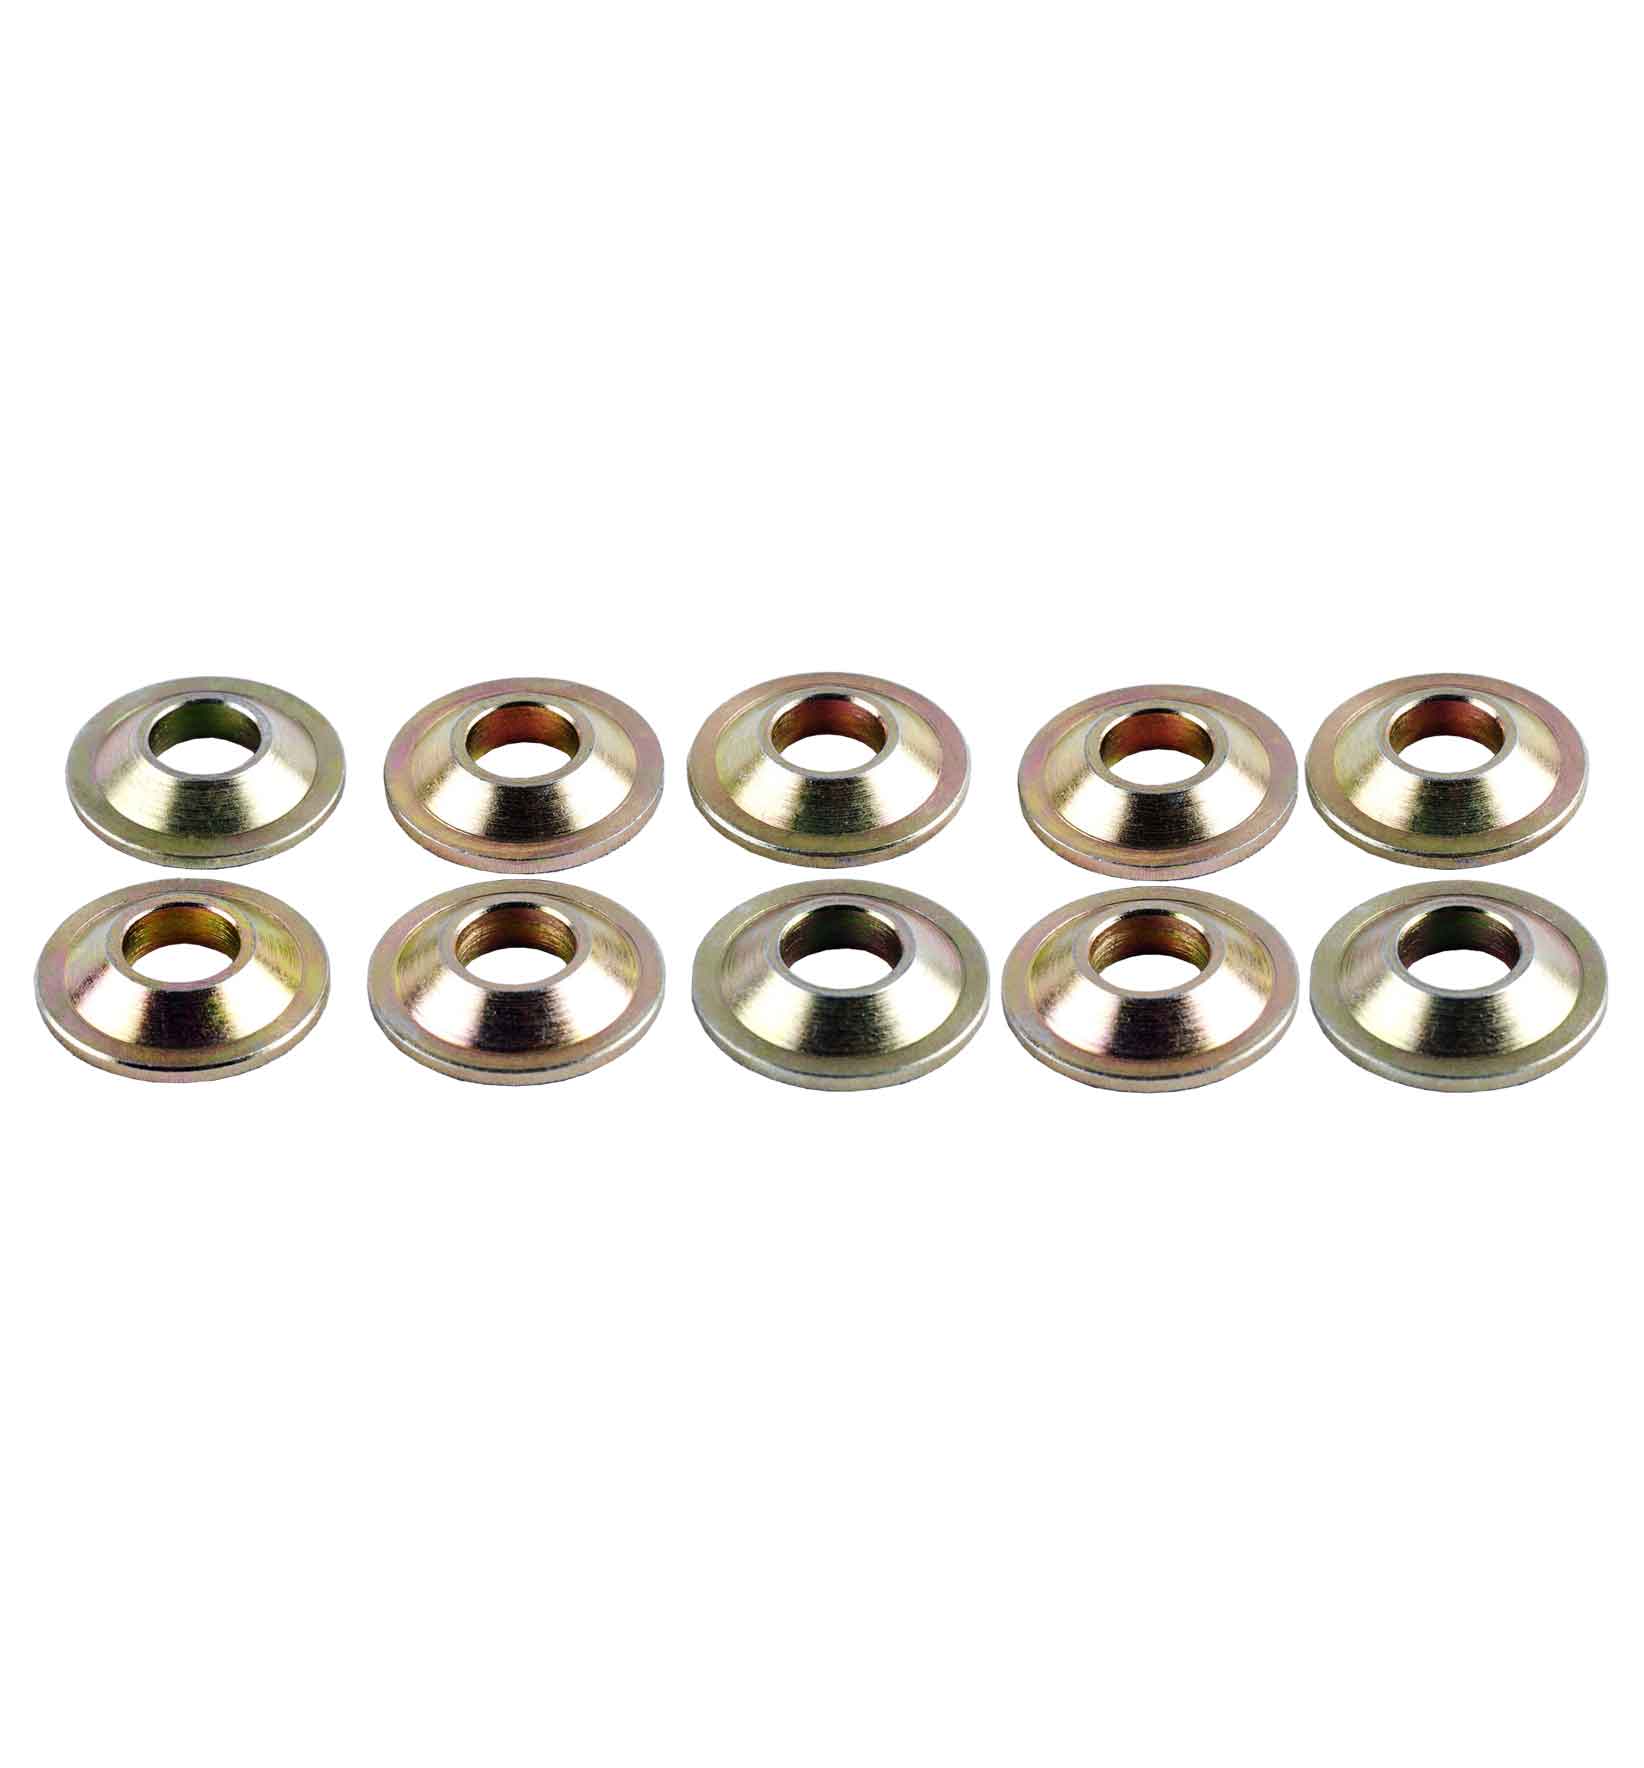 3/8" Rose Joint Misalignment Spacers (Pack of 10)